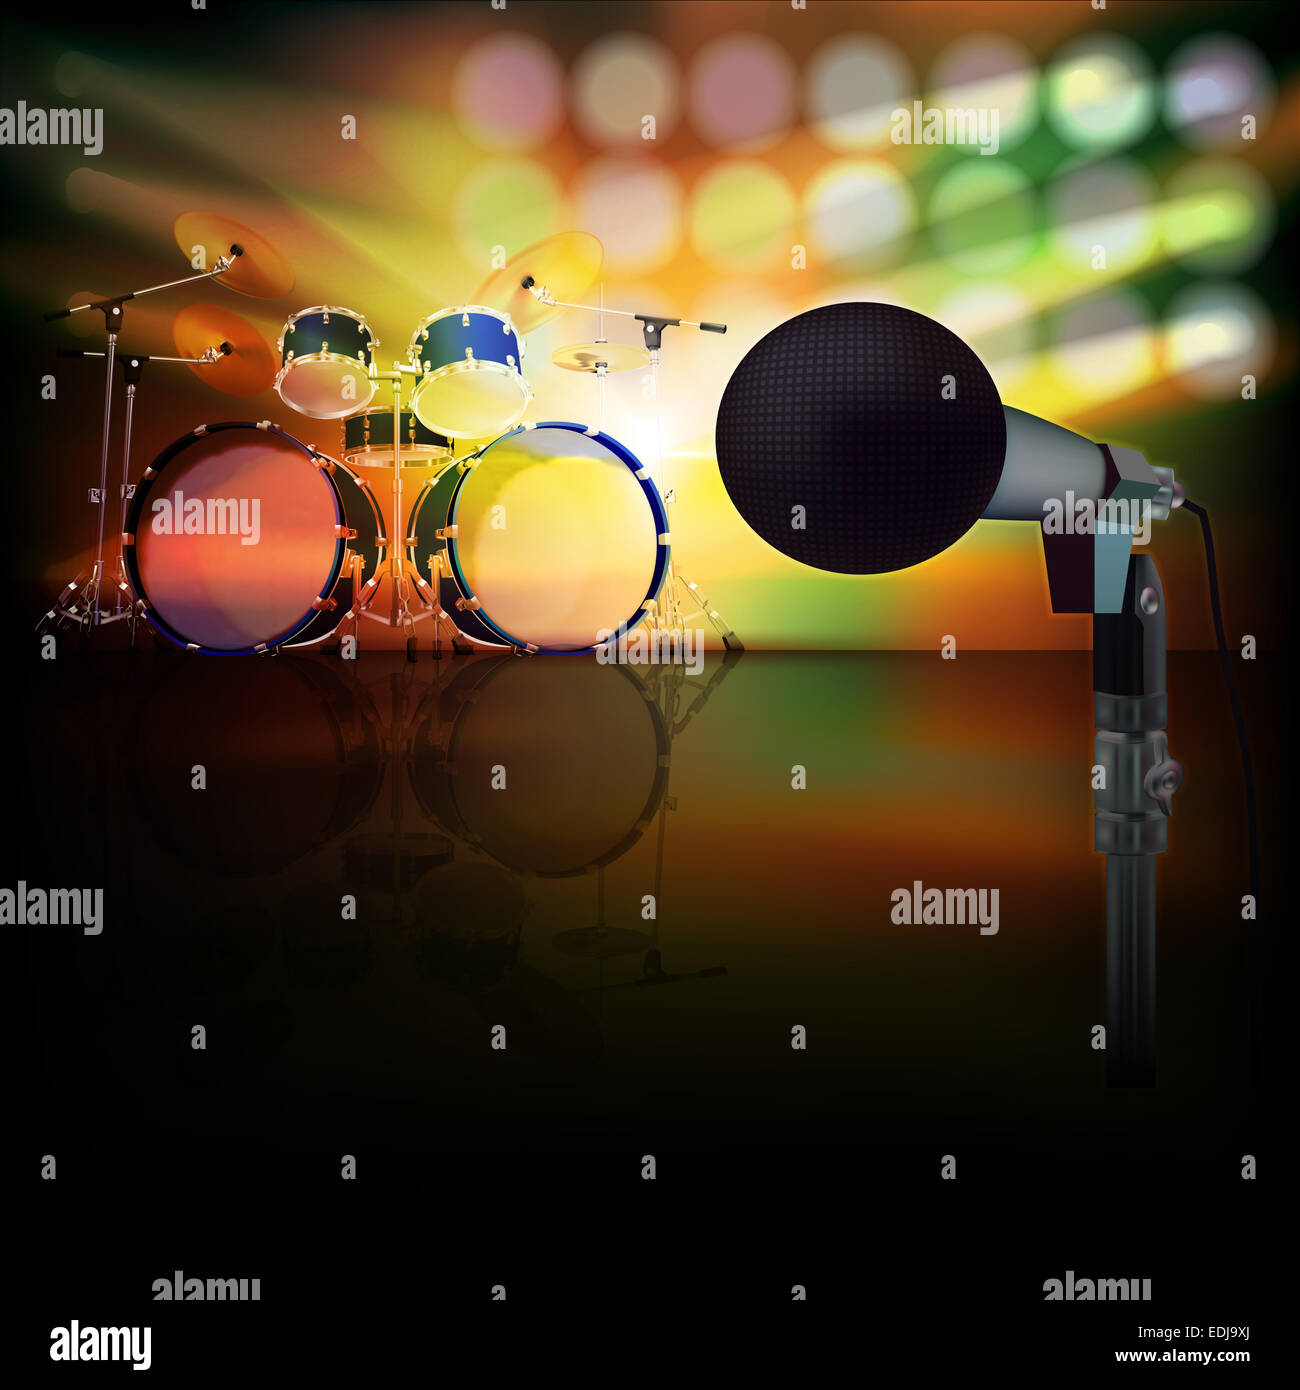 abstract jazz background with drum kit and microphone on music stage Stock Photo